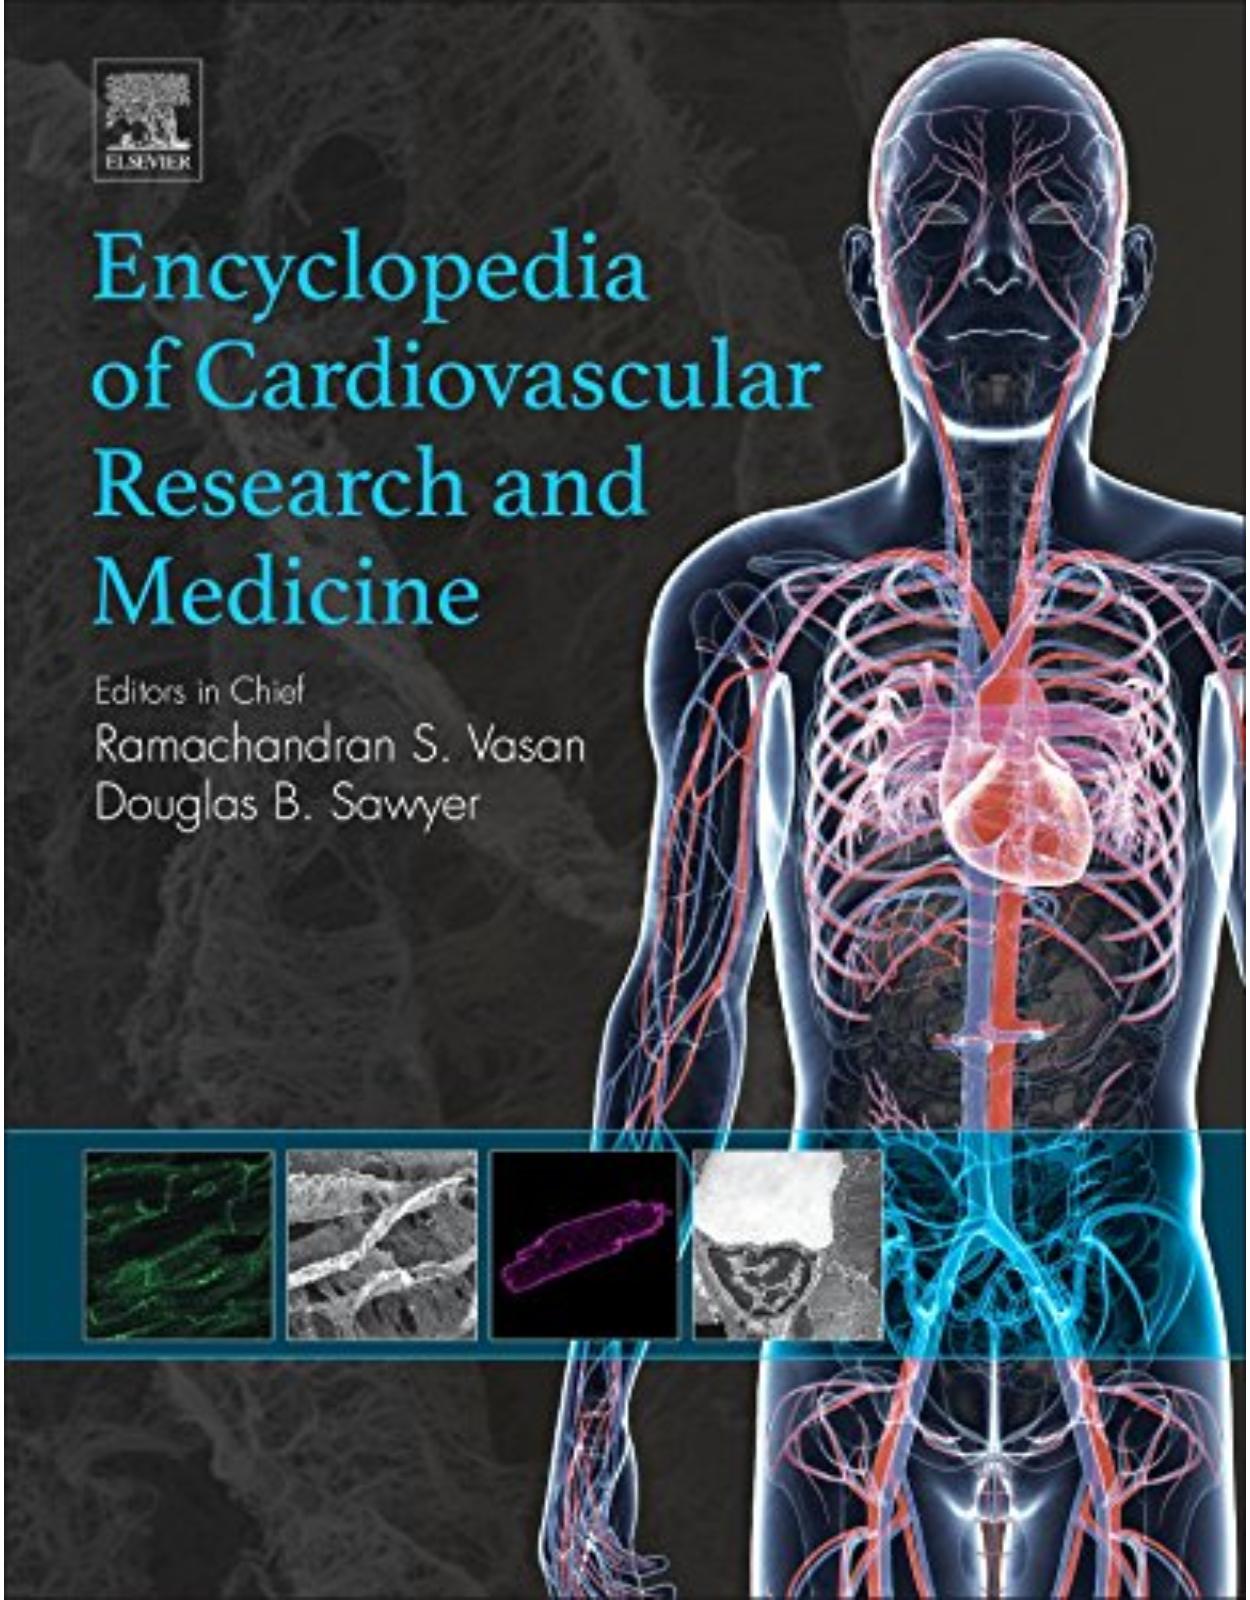 Encyclopedia of Cardiovascular Research and Medicine